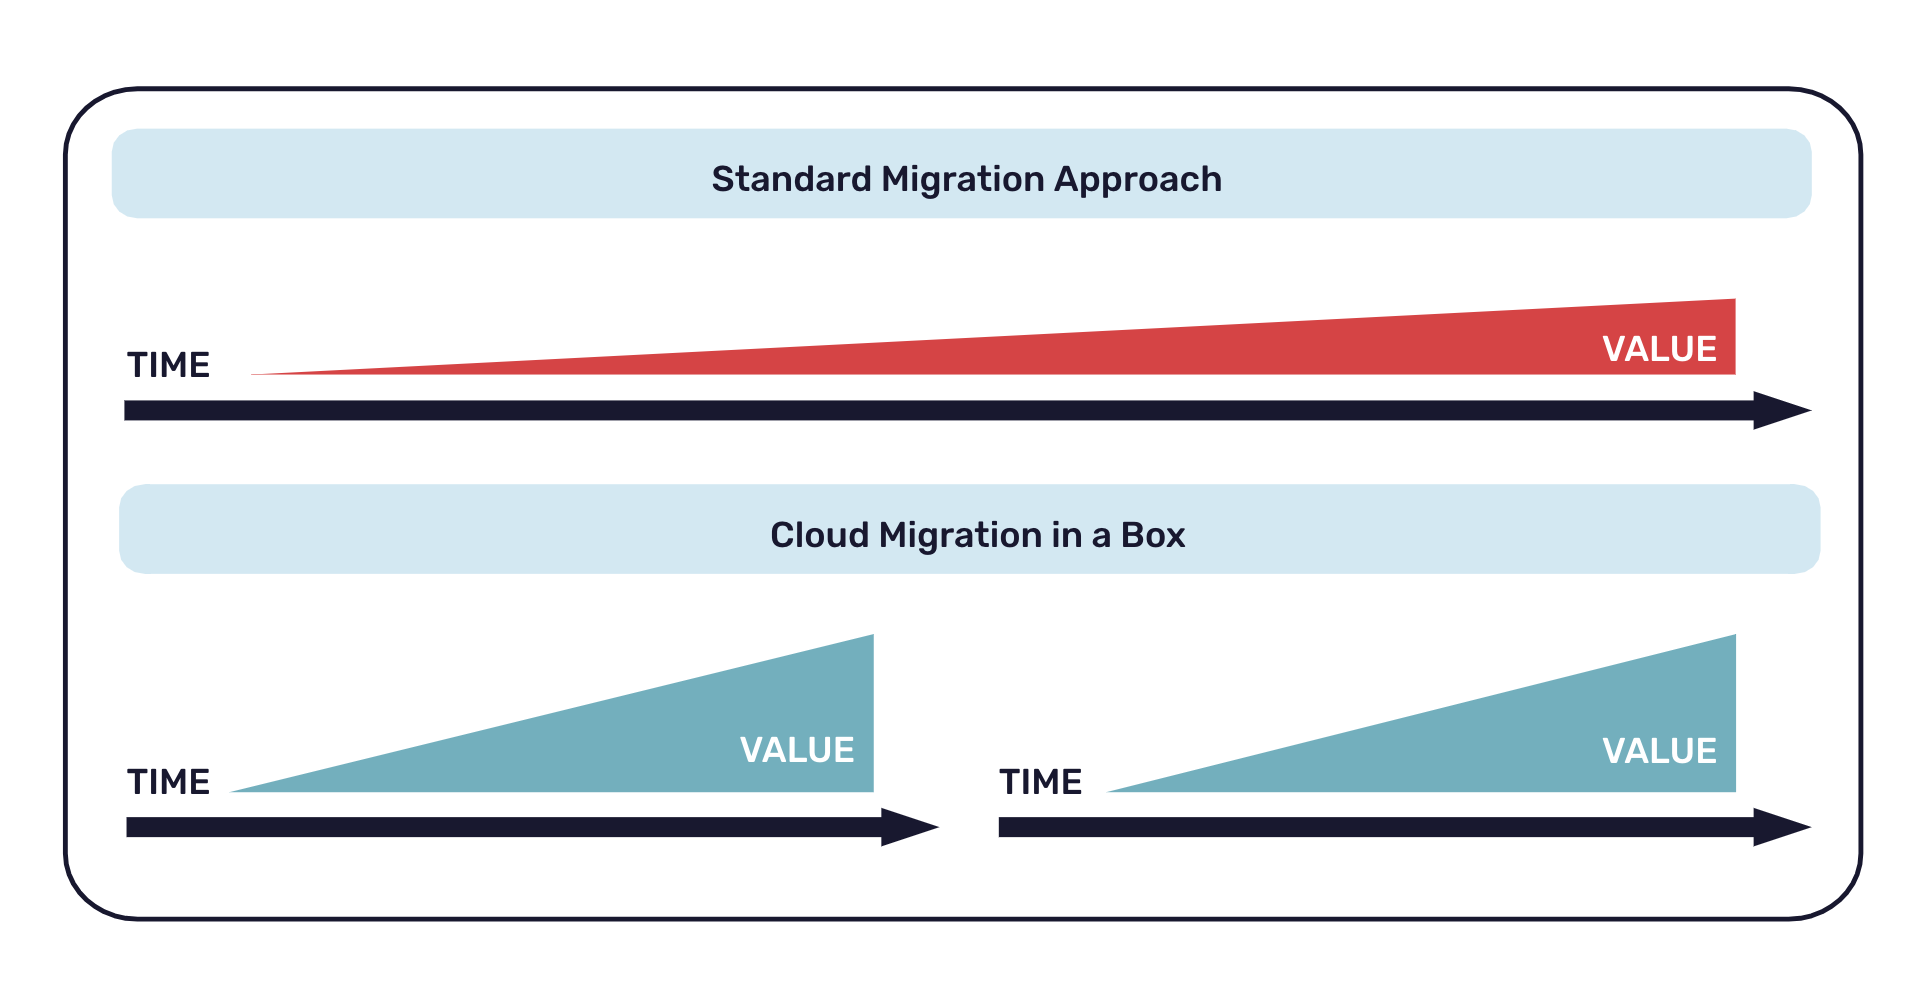 Cloud migration in a Box